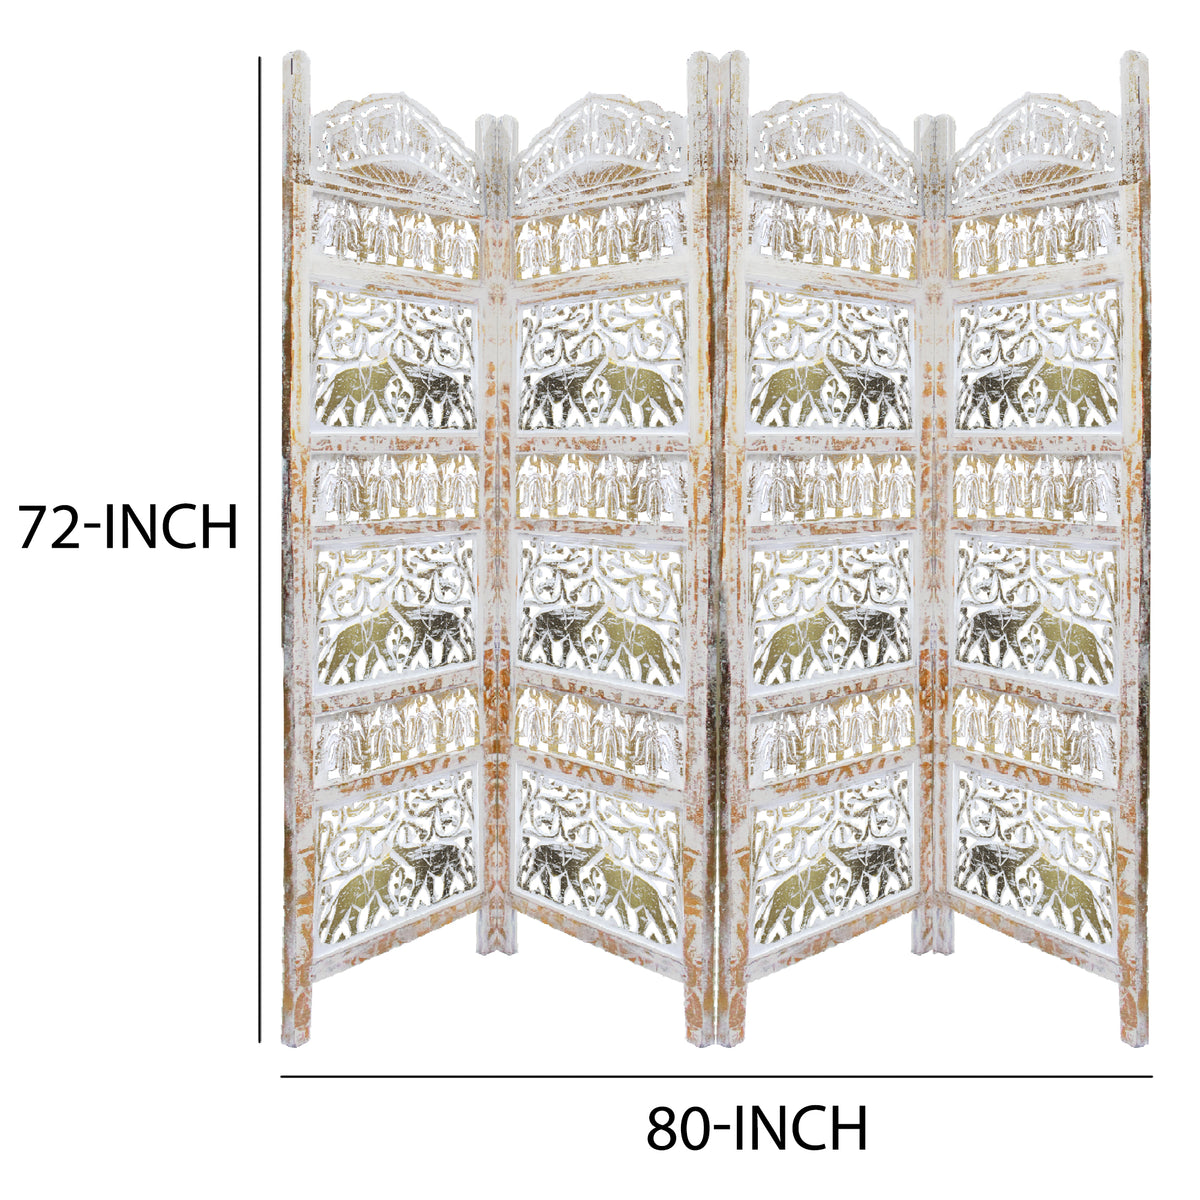 Classic 4 Panel Mango Wood Room Divider with Elephant Carvings, Gold and White - BM80947